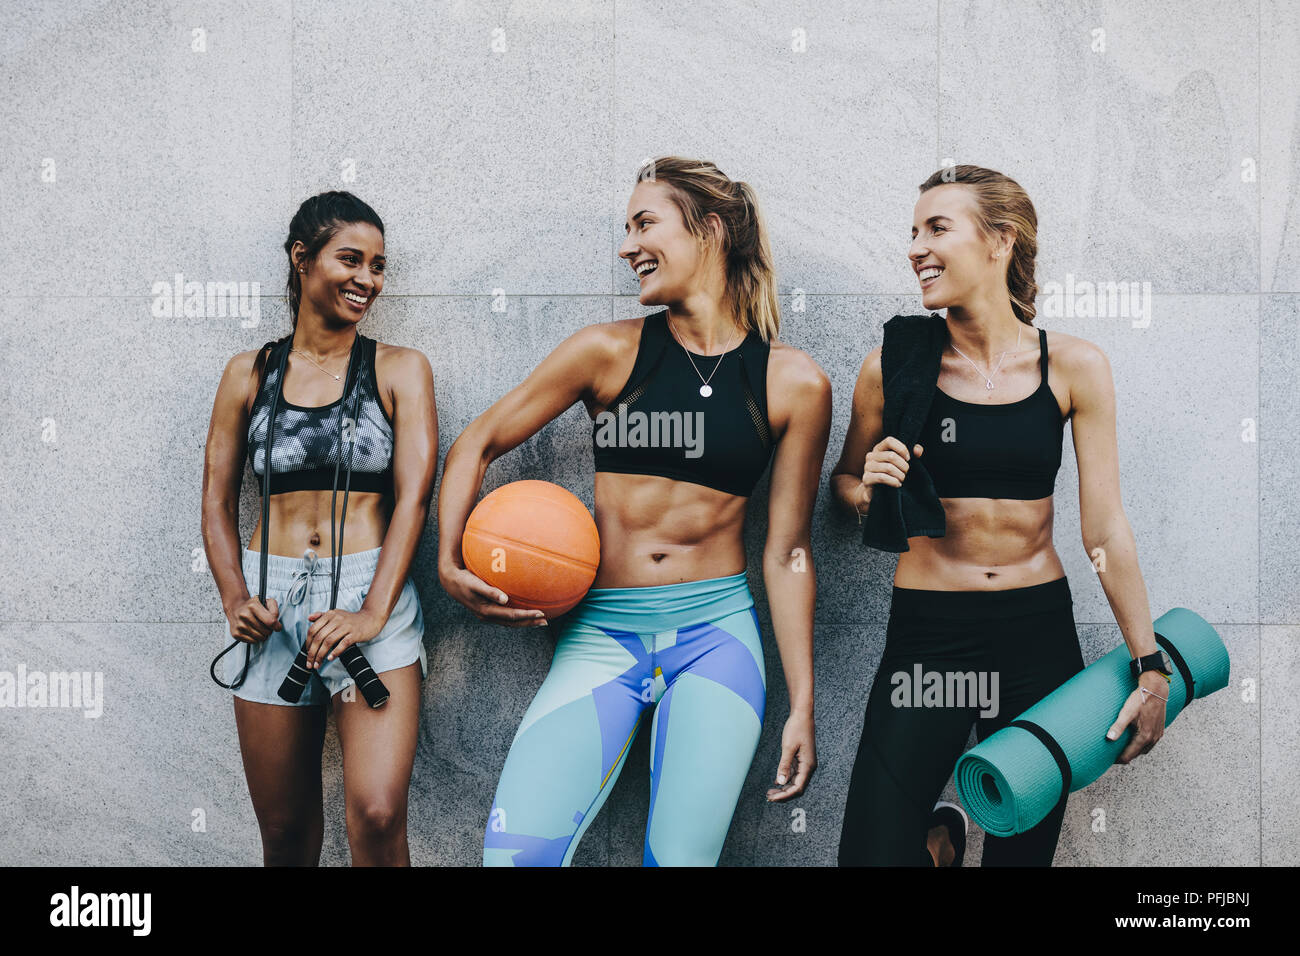 Smiling women athletes in fitness clothes relaxing after workout